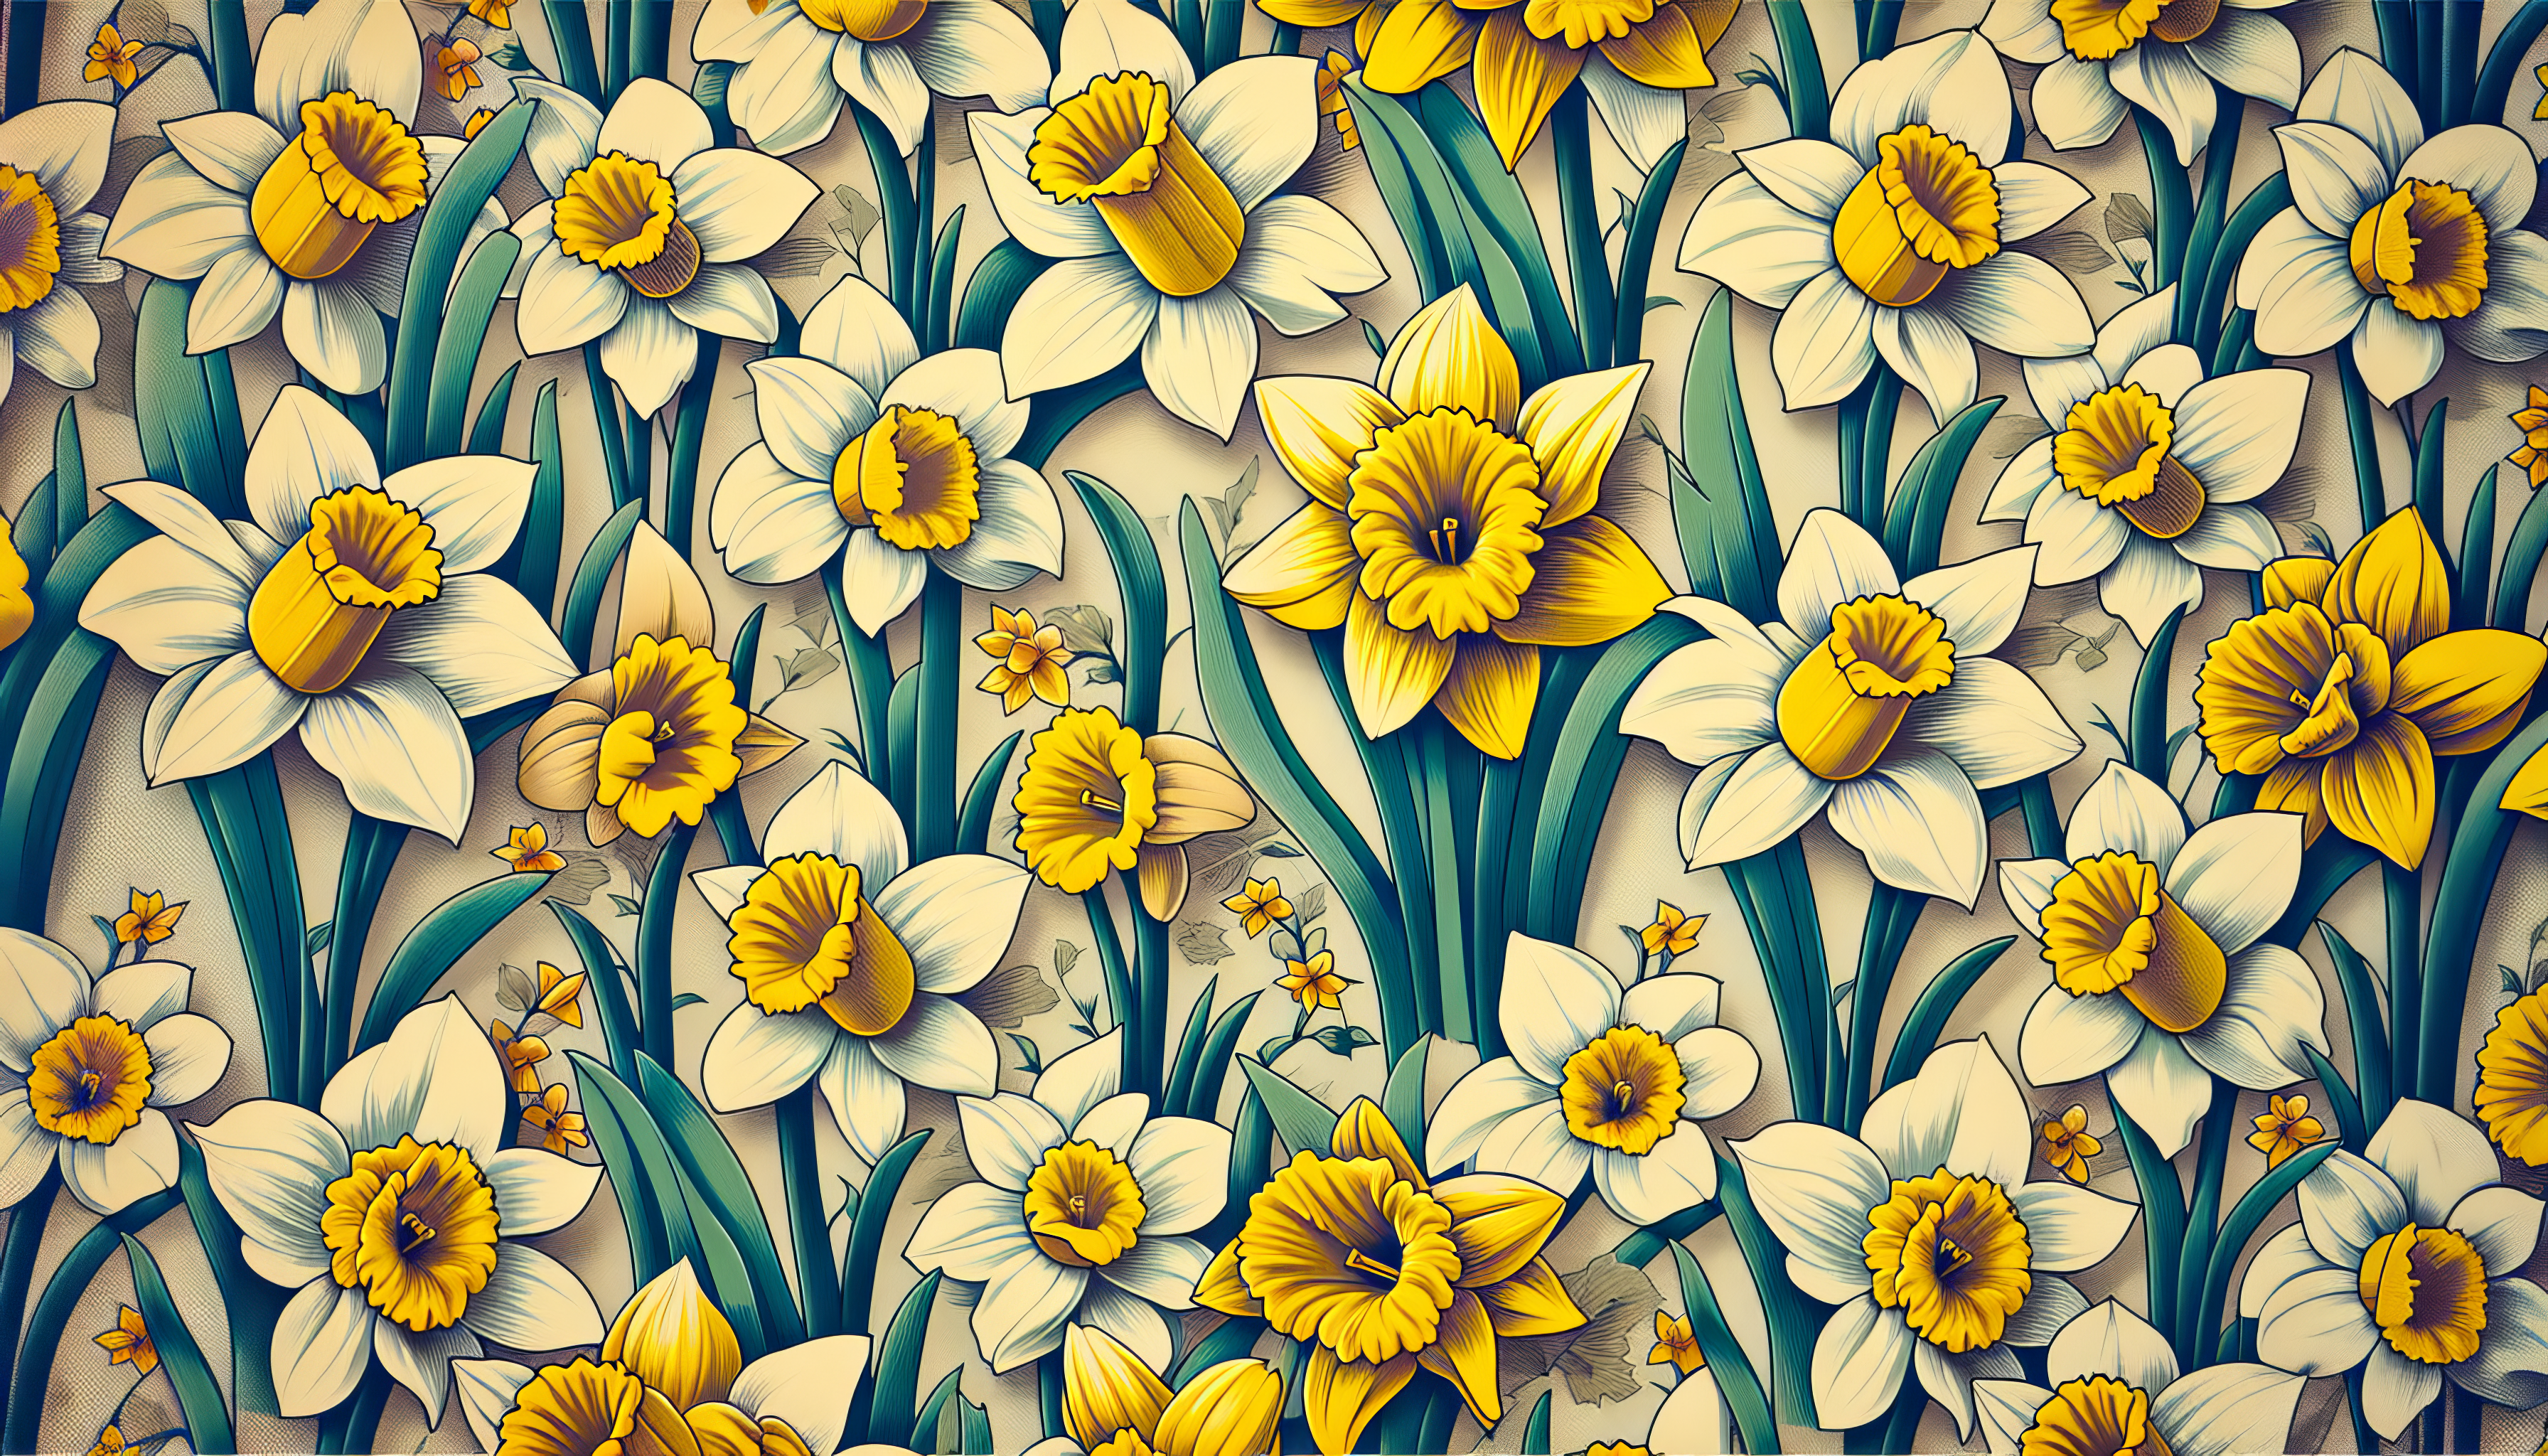 HD wallpaper featuring a vibrant pattern of daffodils for a desktop background with a vintage feel.